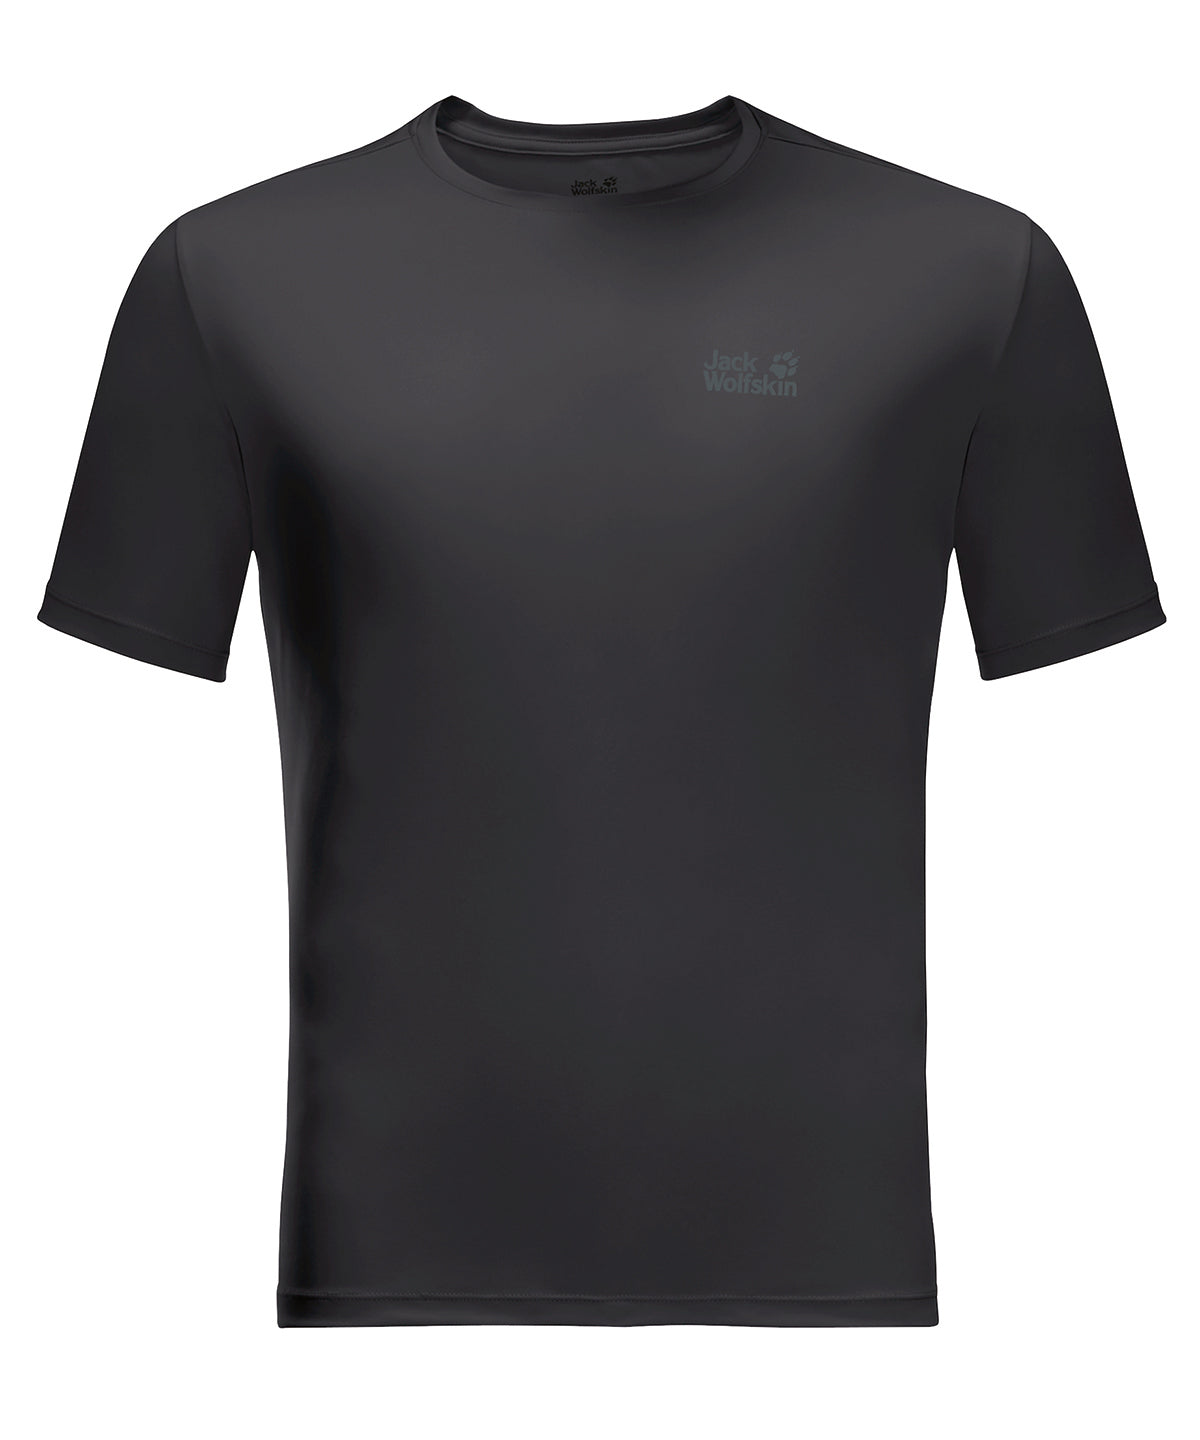 Personalised T-Shirts - Black Jack Wolfskin Technical tee (NL)